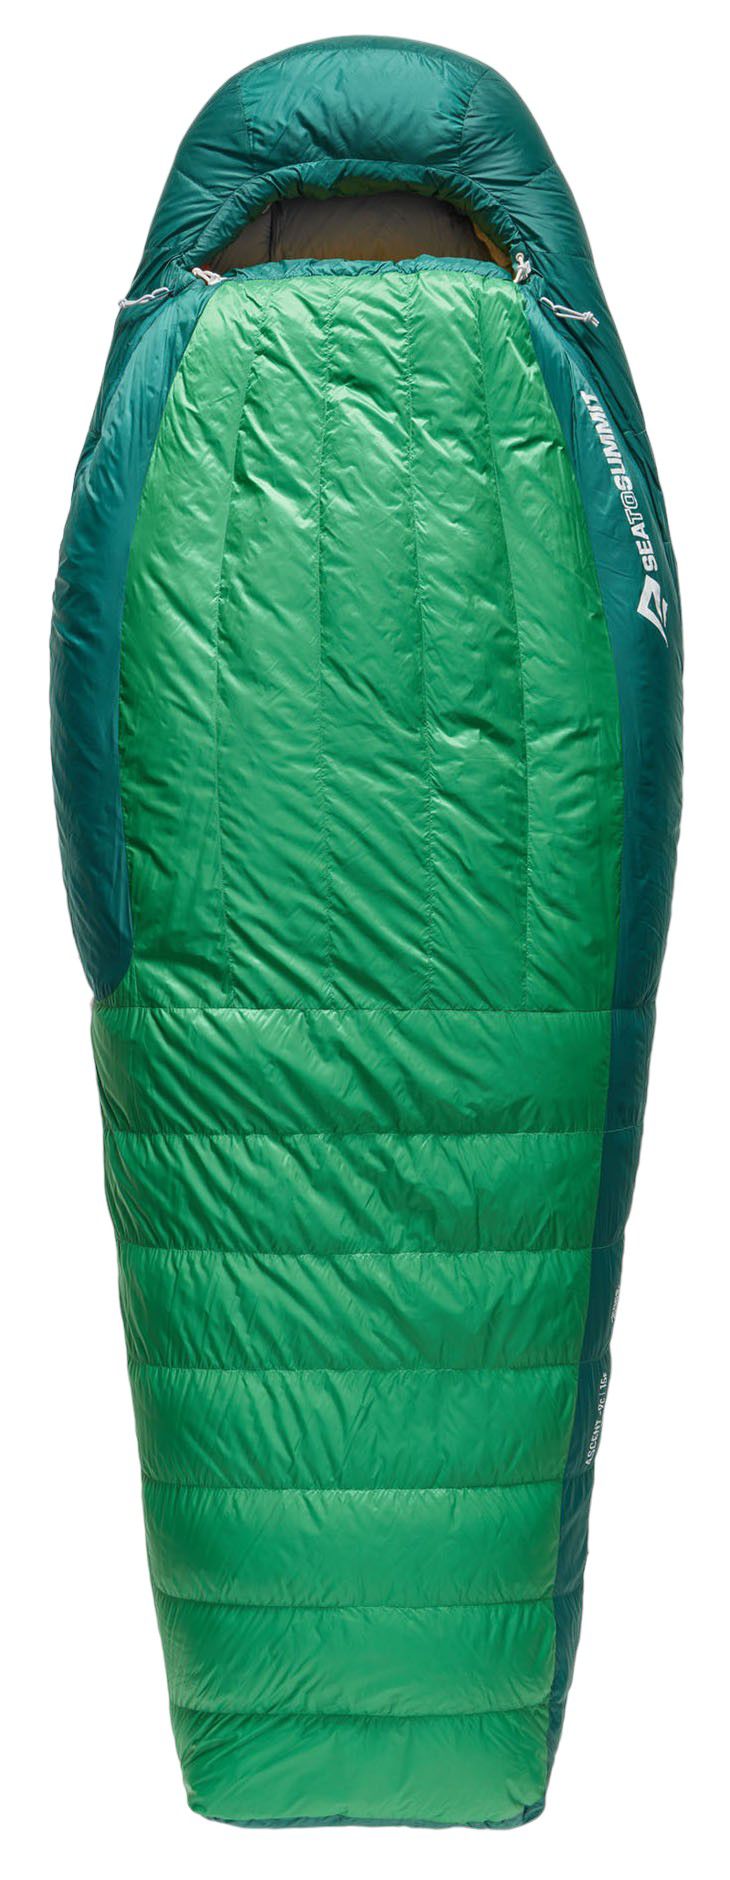 Photos - Suitcase / Backpack Cover Sea To Summit Alpine Down Winter Sleeping Bag, Men's, Rainforest Green 23S 